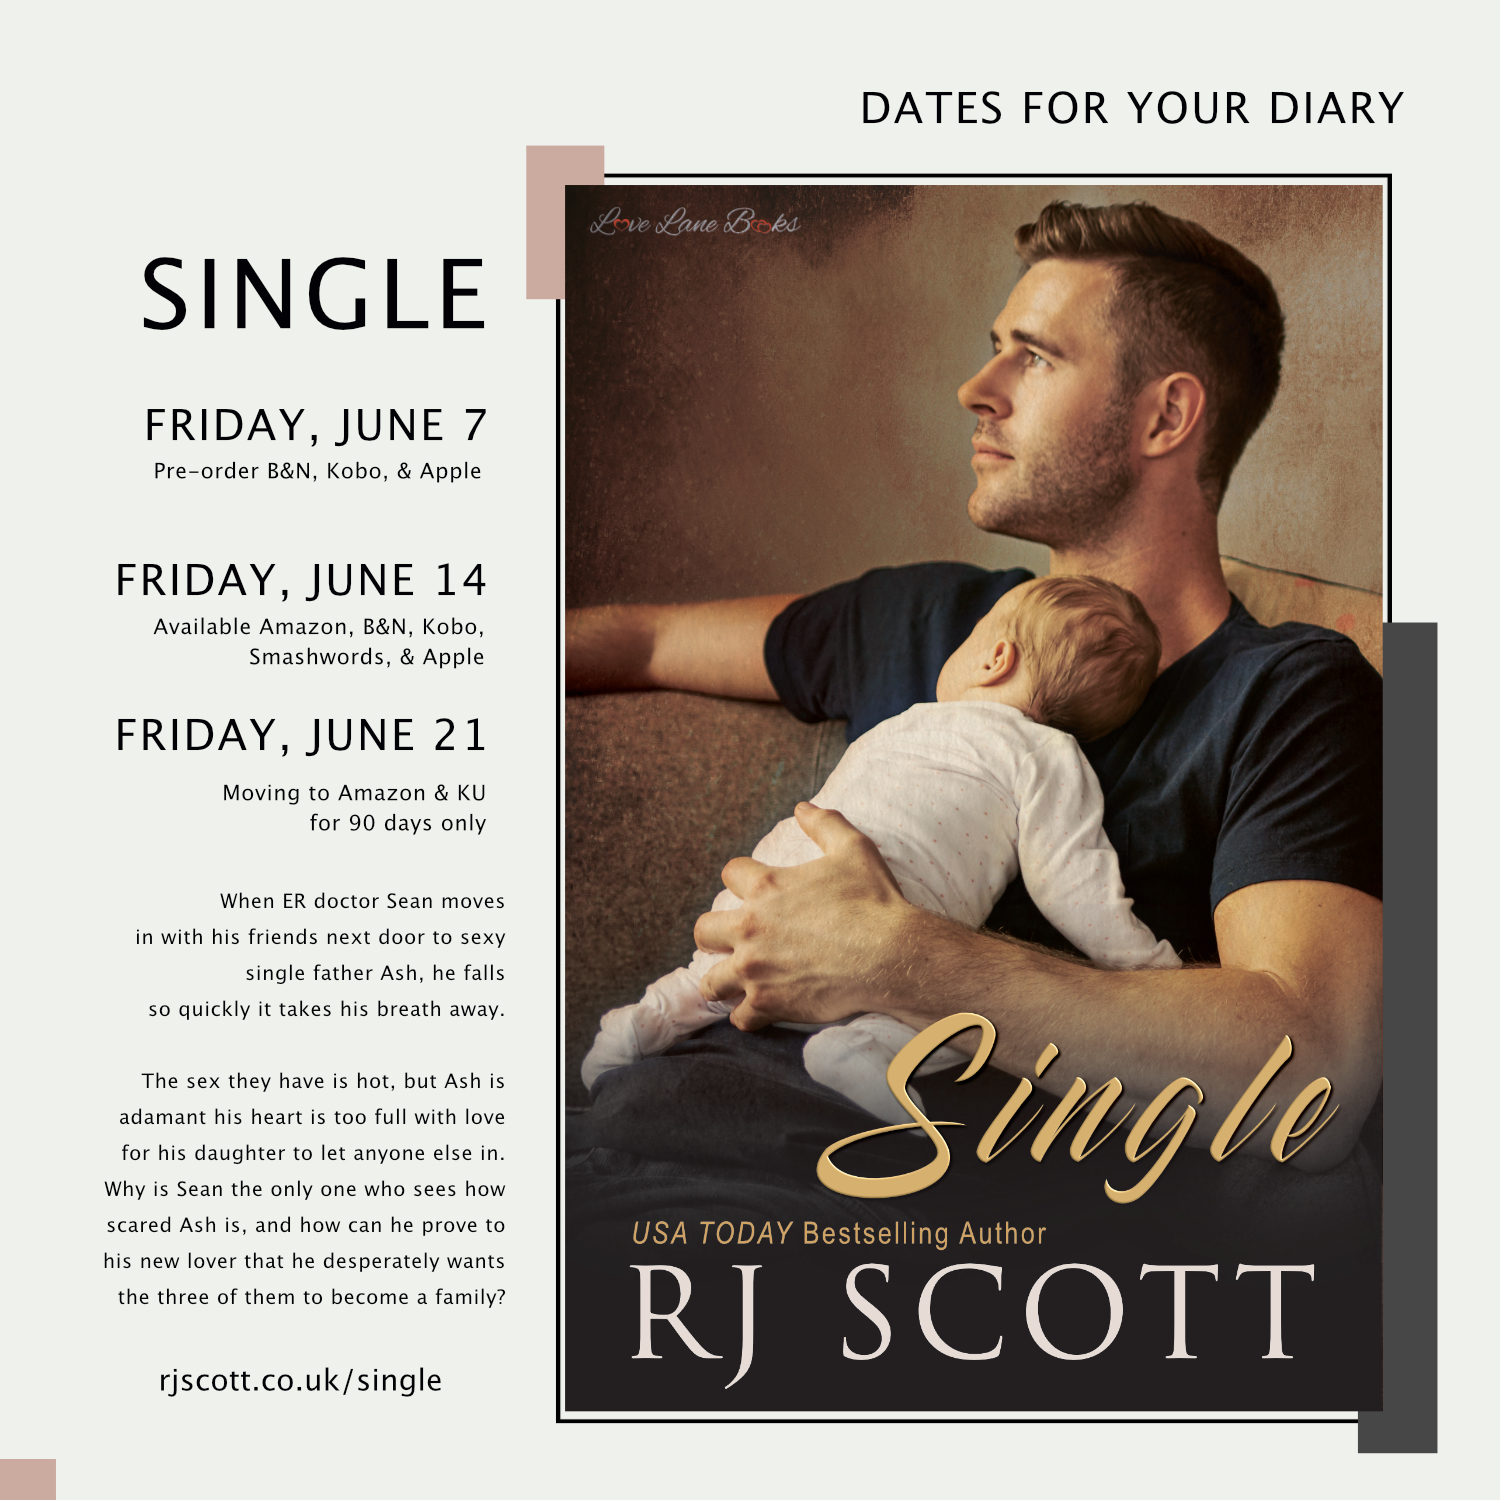 Single - Dates For Your Diary - RJ Scott USA Today best selling authors of Gay MM Romance